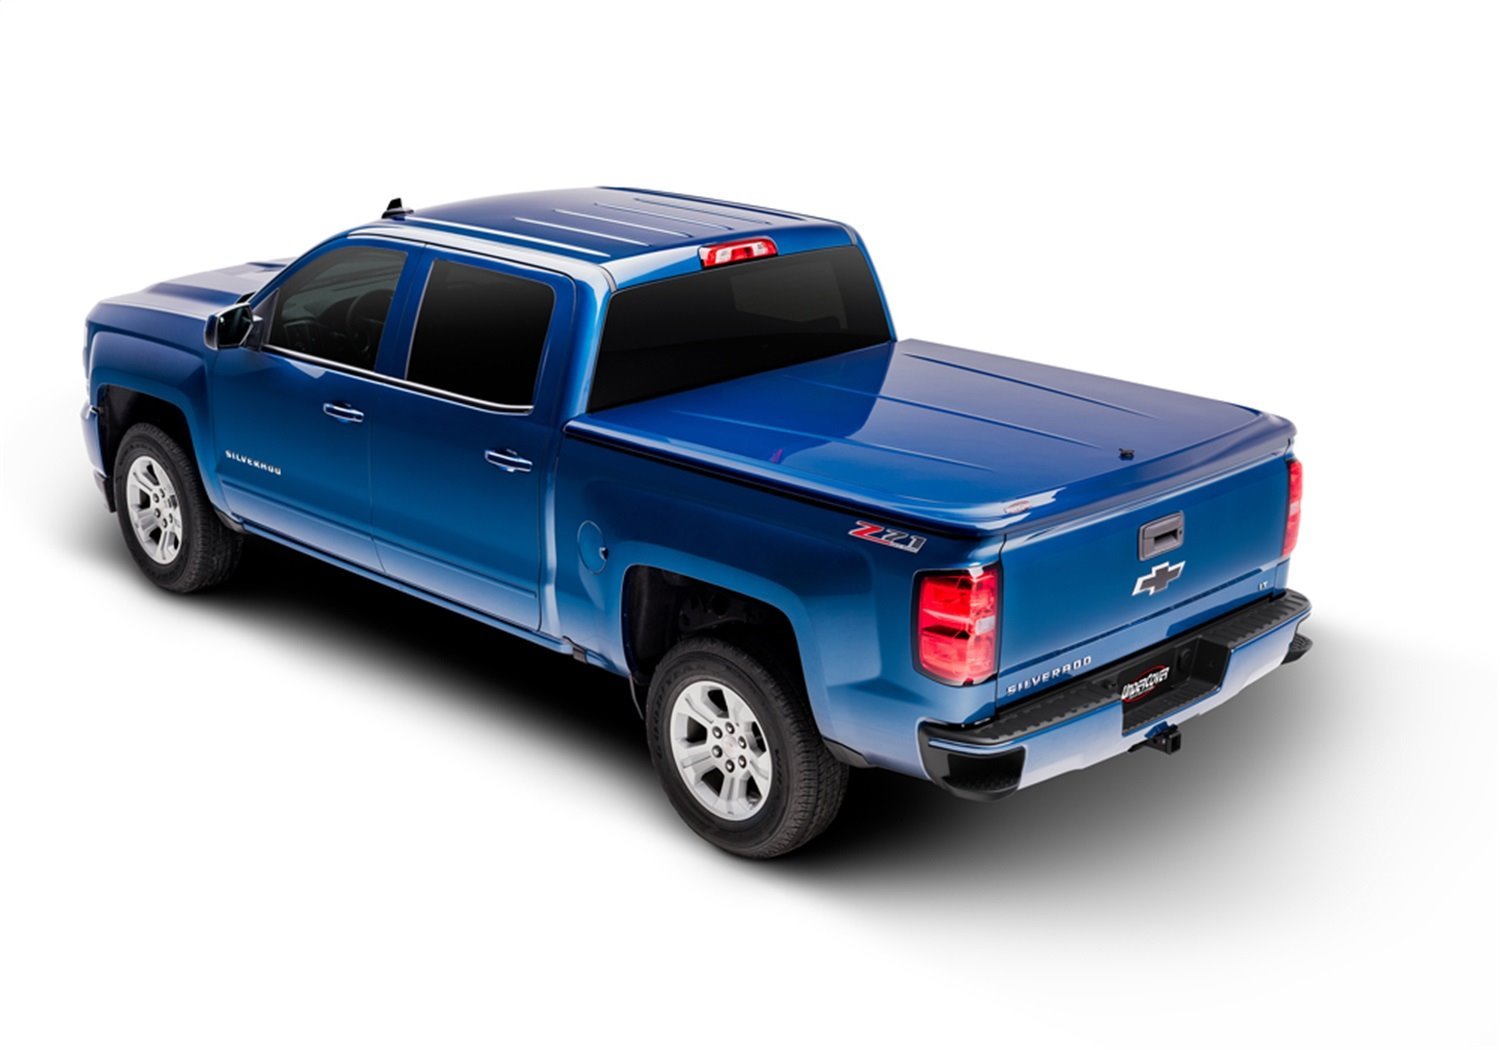 UC2206L-HX LUX Hard Non-Folding Cover, Fits Select Ford F-150 5'7" Bed Crew (Includes Lightning) HX Antimatter Blue